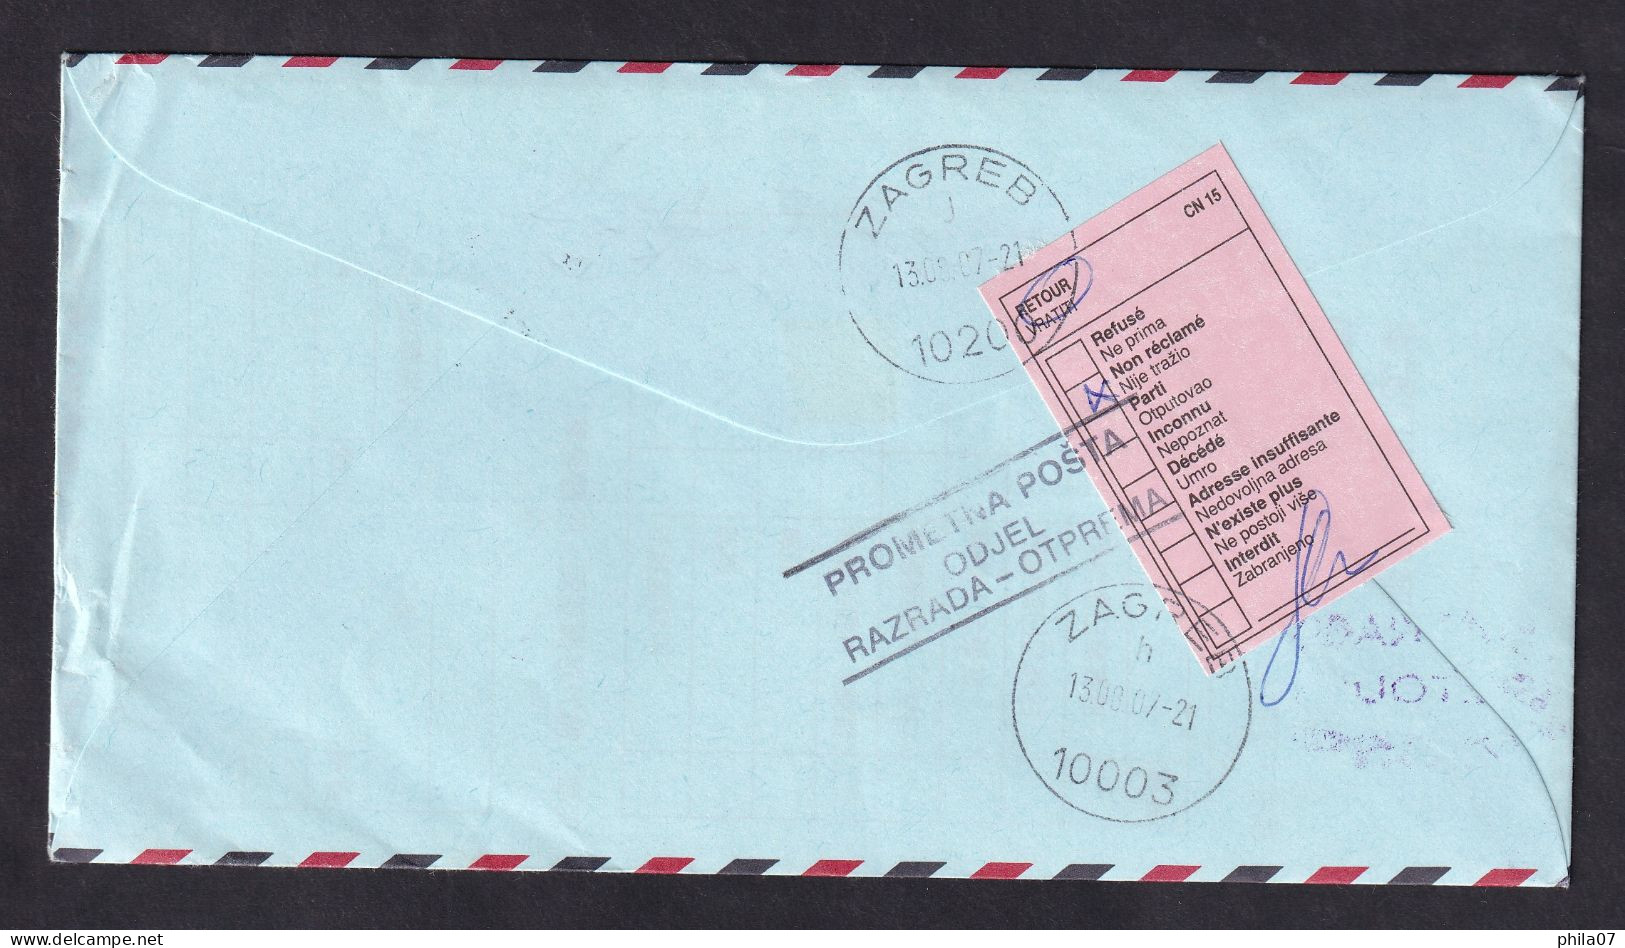 TAIWAN Envelope Sent Via Air Mail From Taiwan To Zagreb And Returned To Taiwan, Not Reclamed - Cancel On Envelope/2scans - Storia Postale